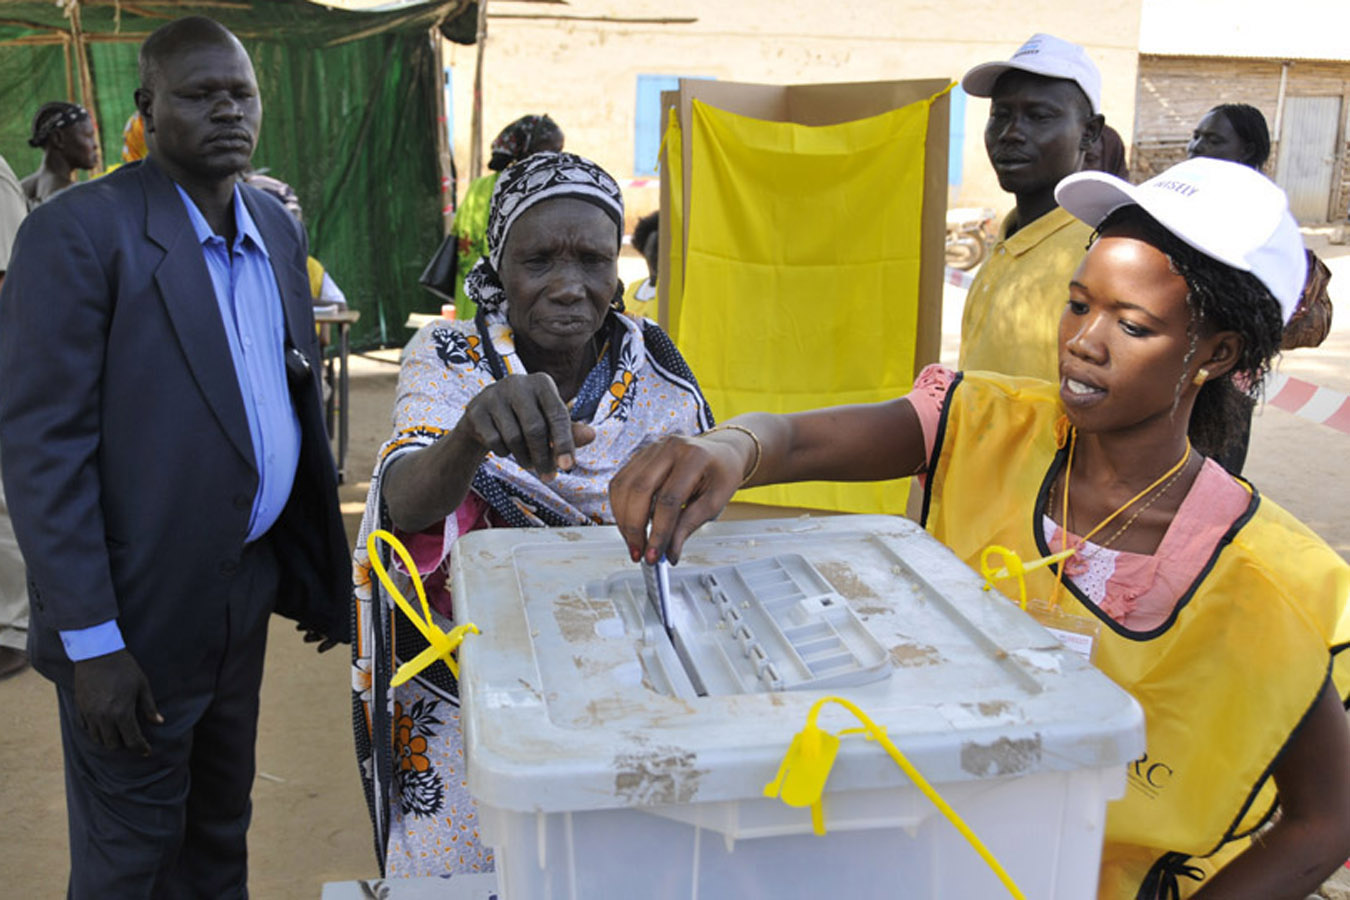 A polling official helps a woman cast her ballot on Jan. 9 in Juba.